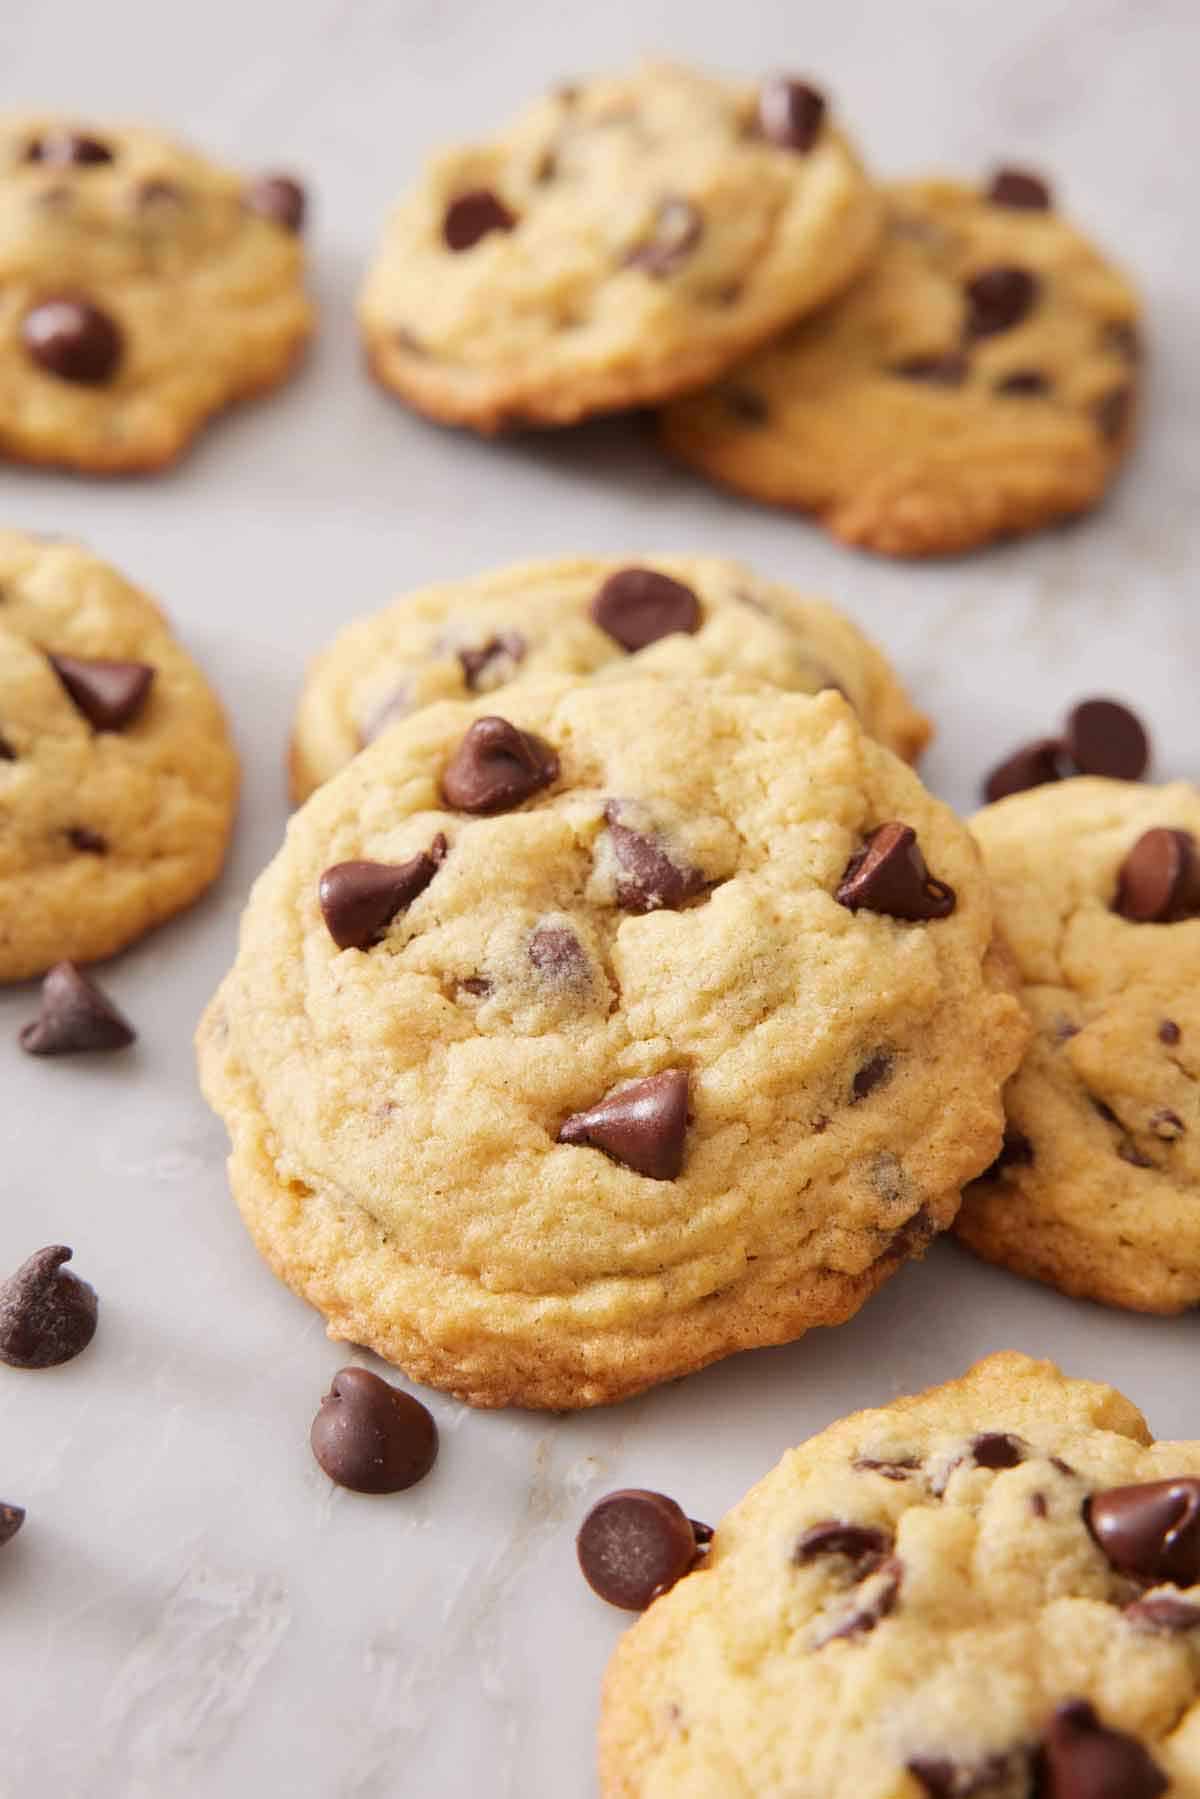 Multiple pudding cookies with chocolate chips scattered around.